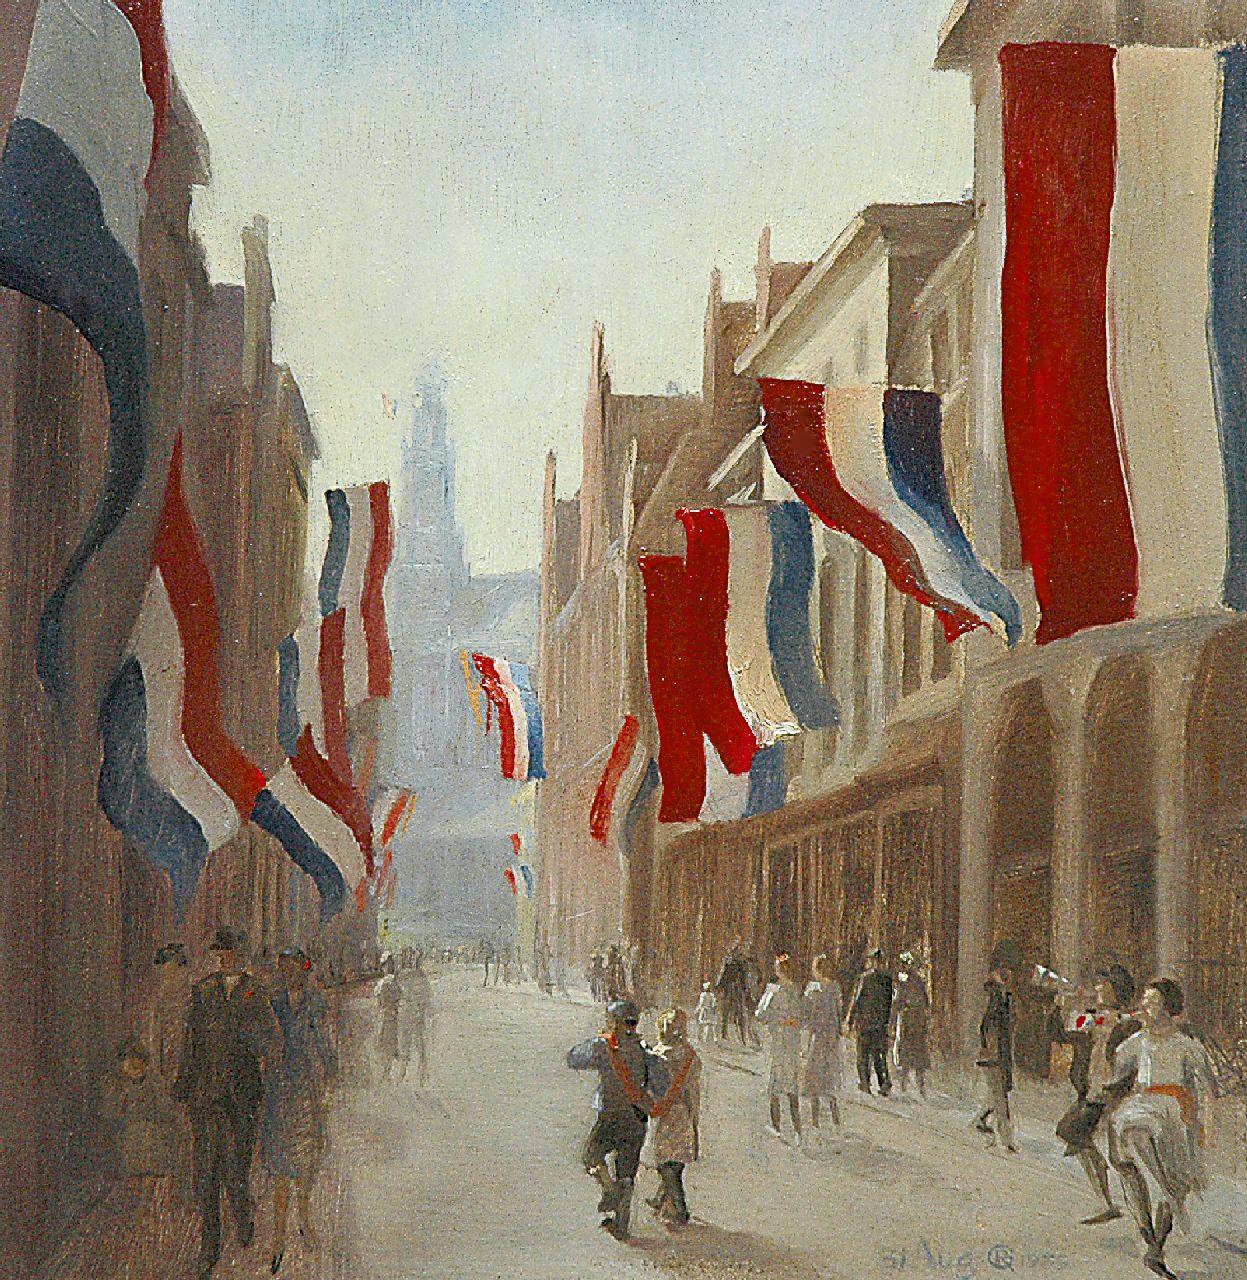 Roelf Gerbrands | Celebrations in Haarlem for the birth of Princess Irene, oil on panel, 22.4 x 22.0 cm, signed l.r. with monogram and dated 31 Aug. 1939